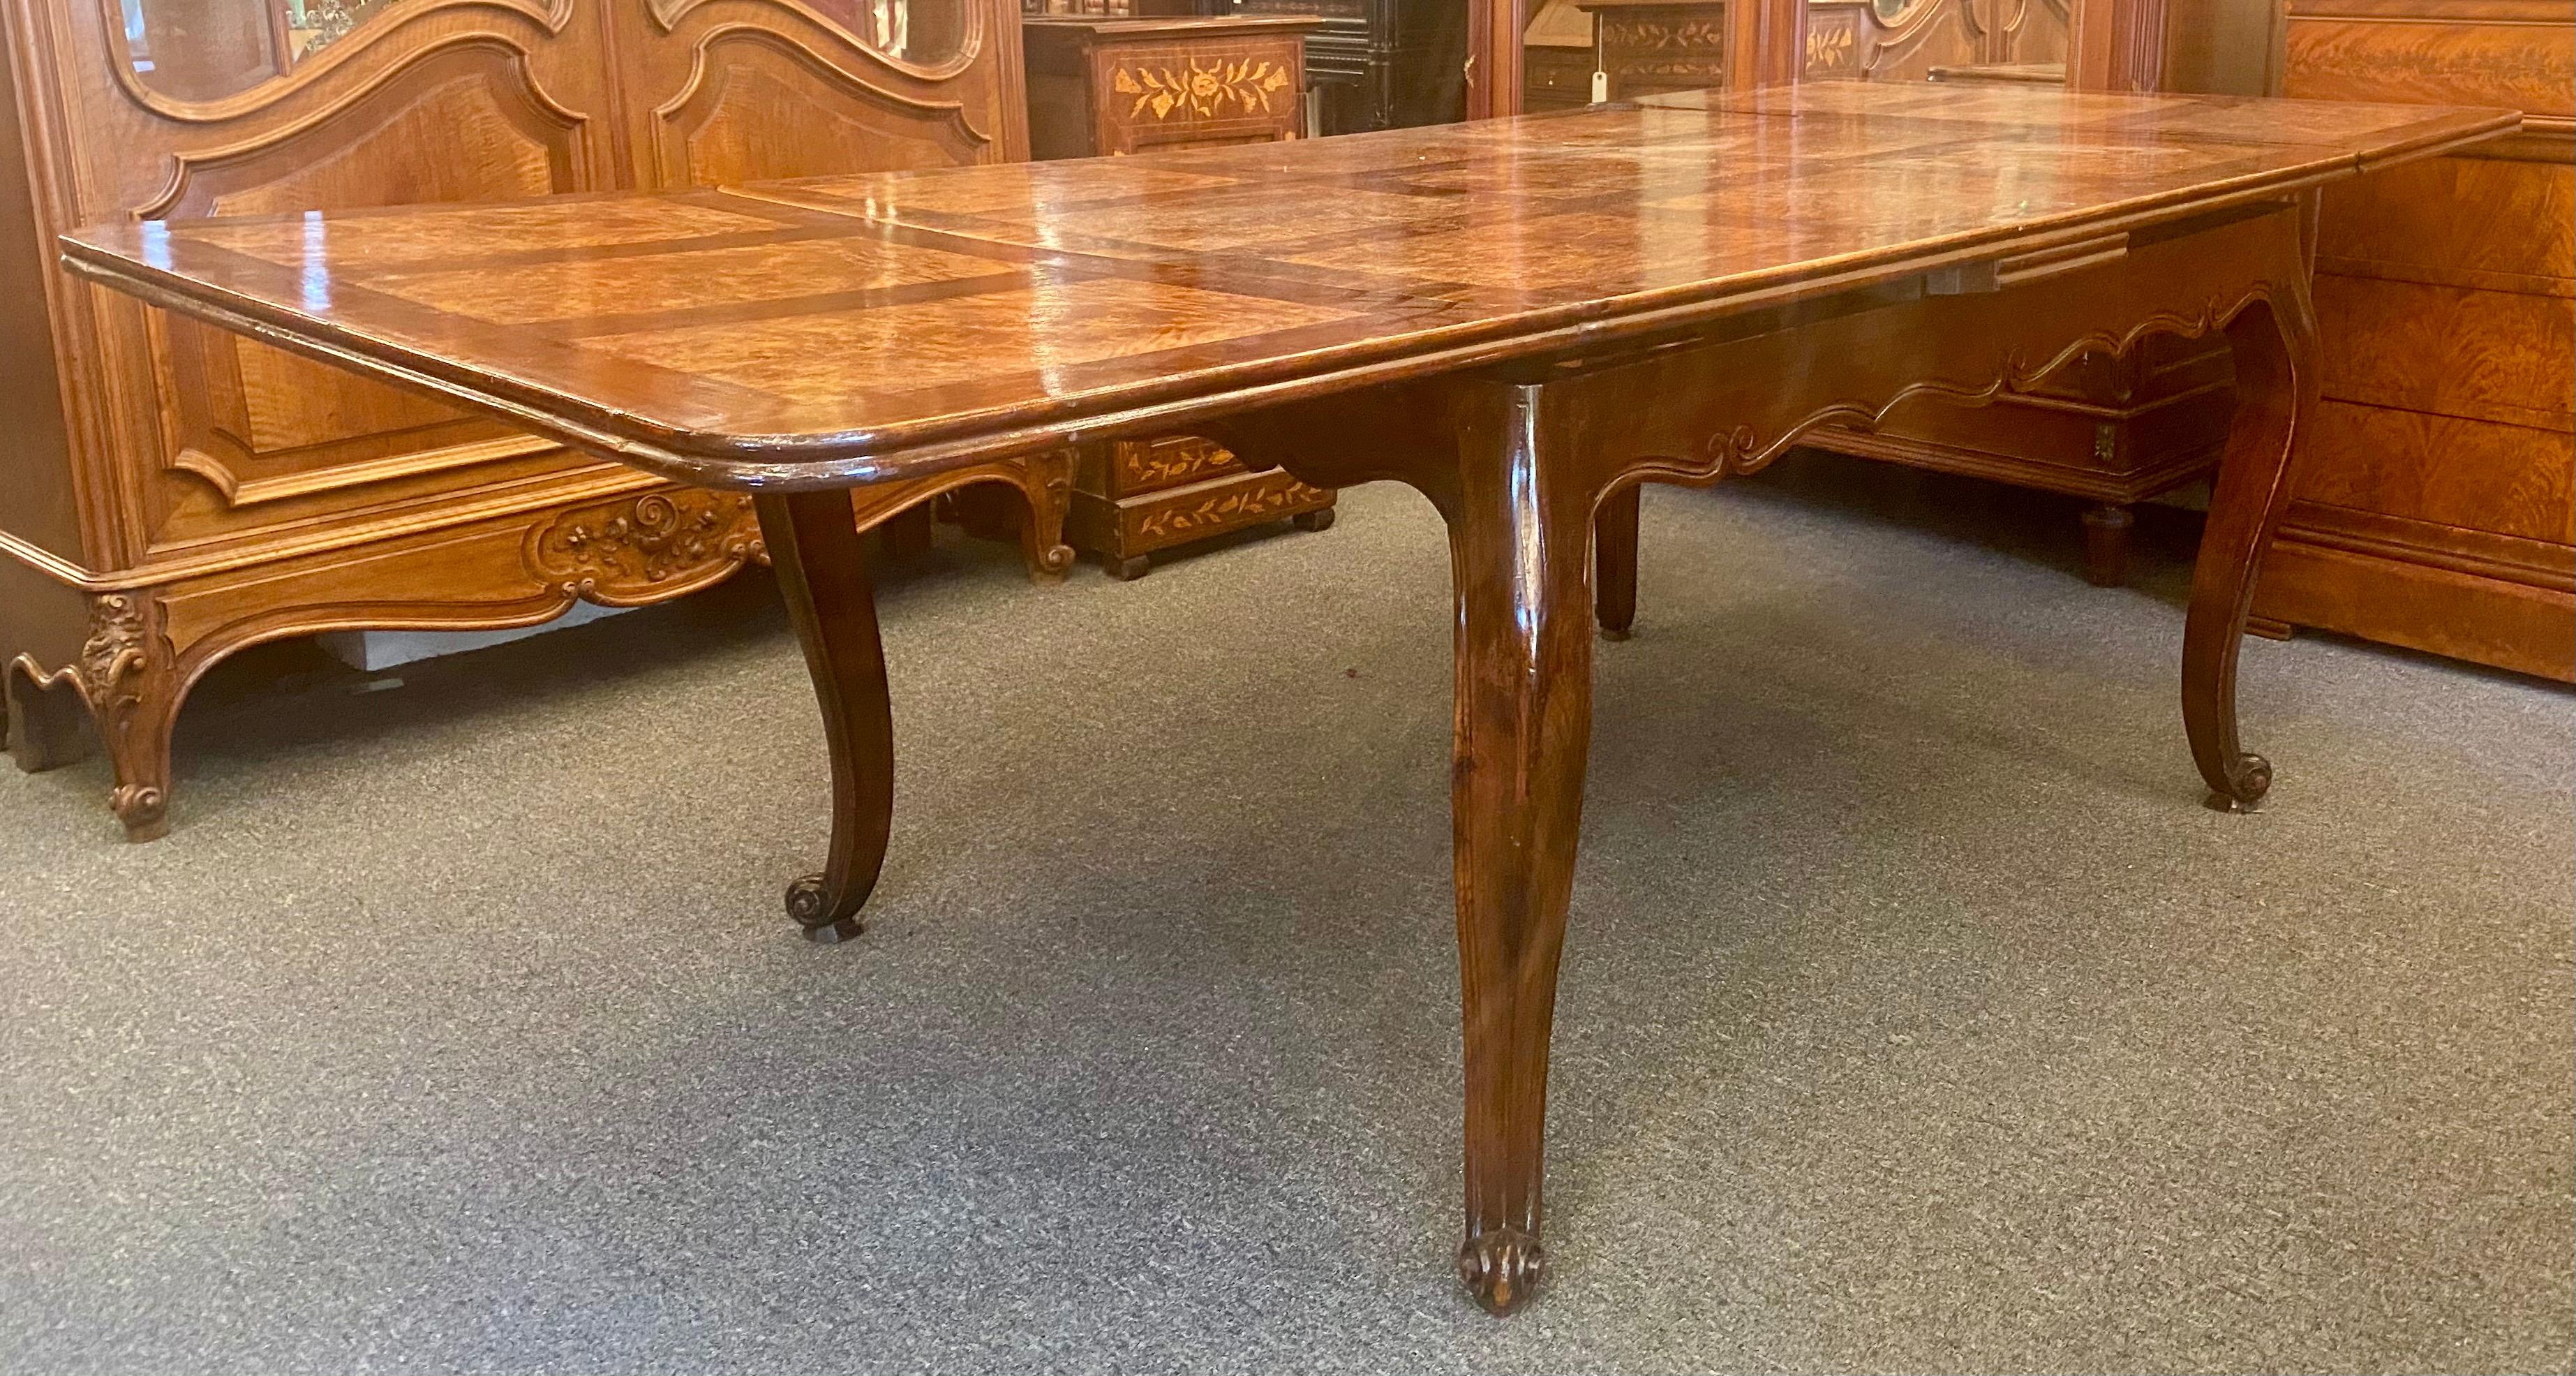 20th Century Antique French Burled Walnut Pull-Out Dining Table with Elm Inlay, circa 1900